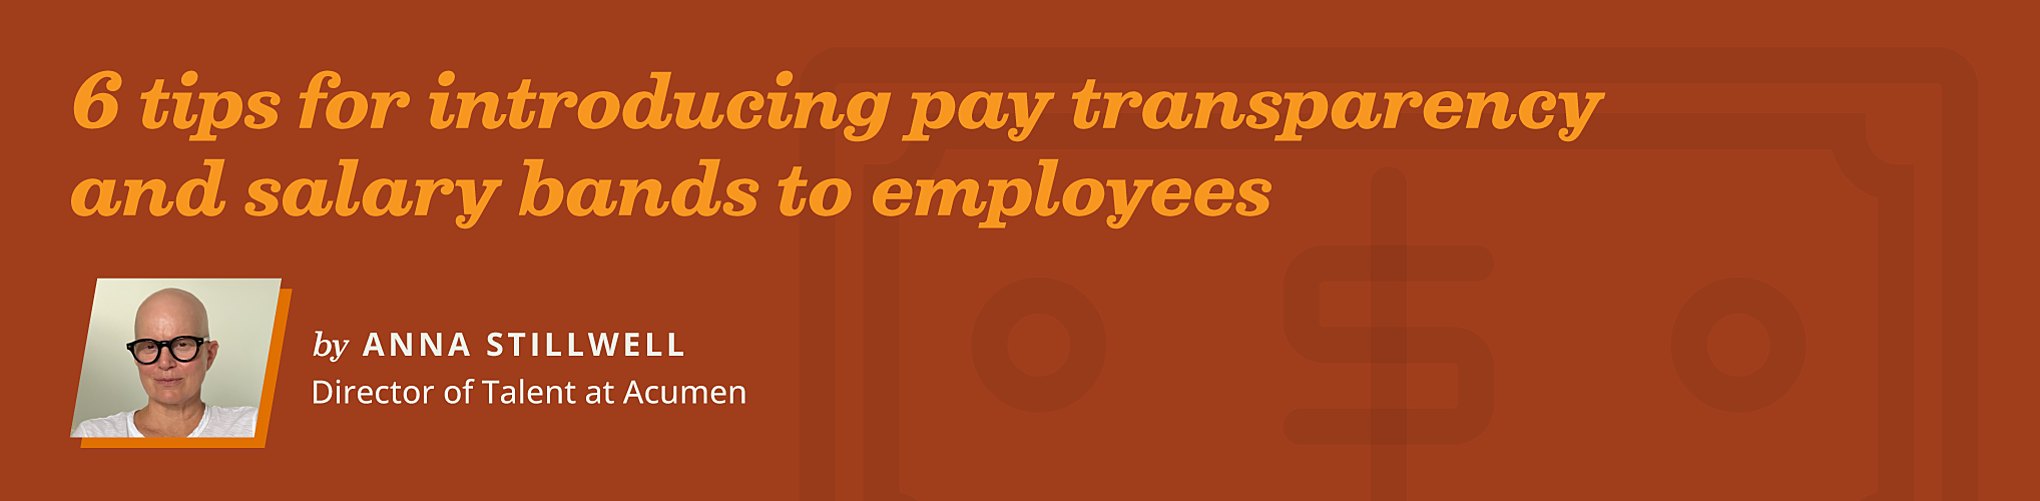 Pay transparency: Are you prepared for employee pushback? 